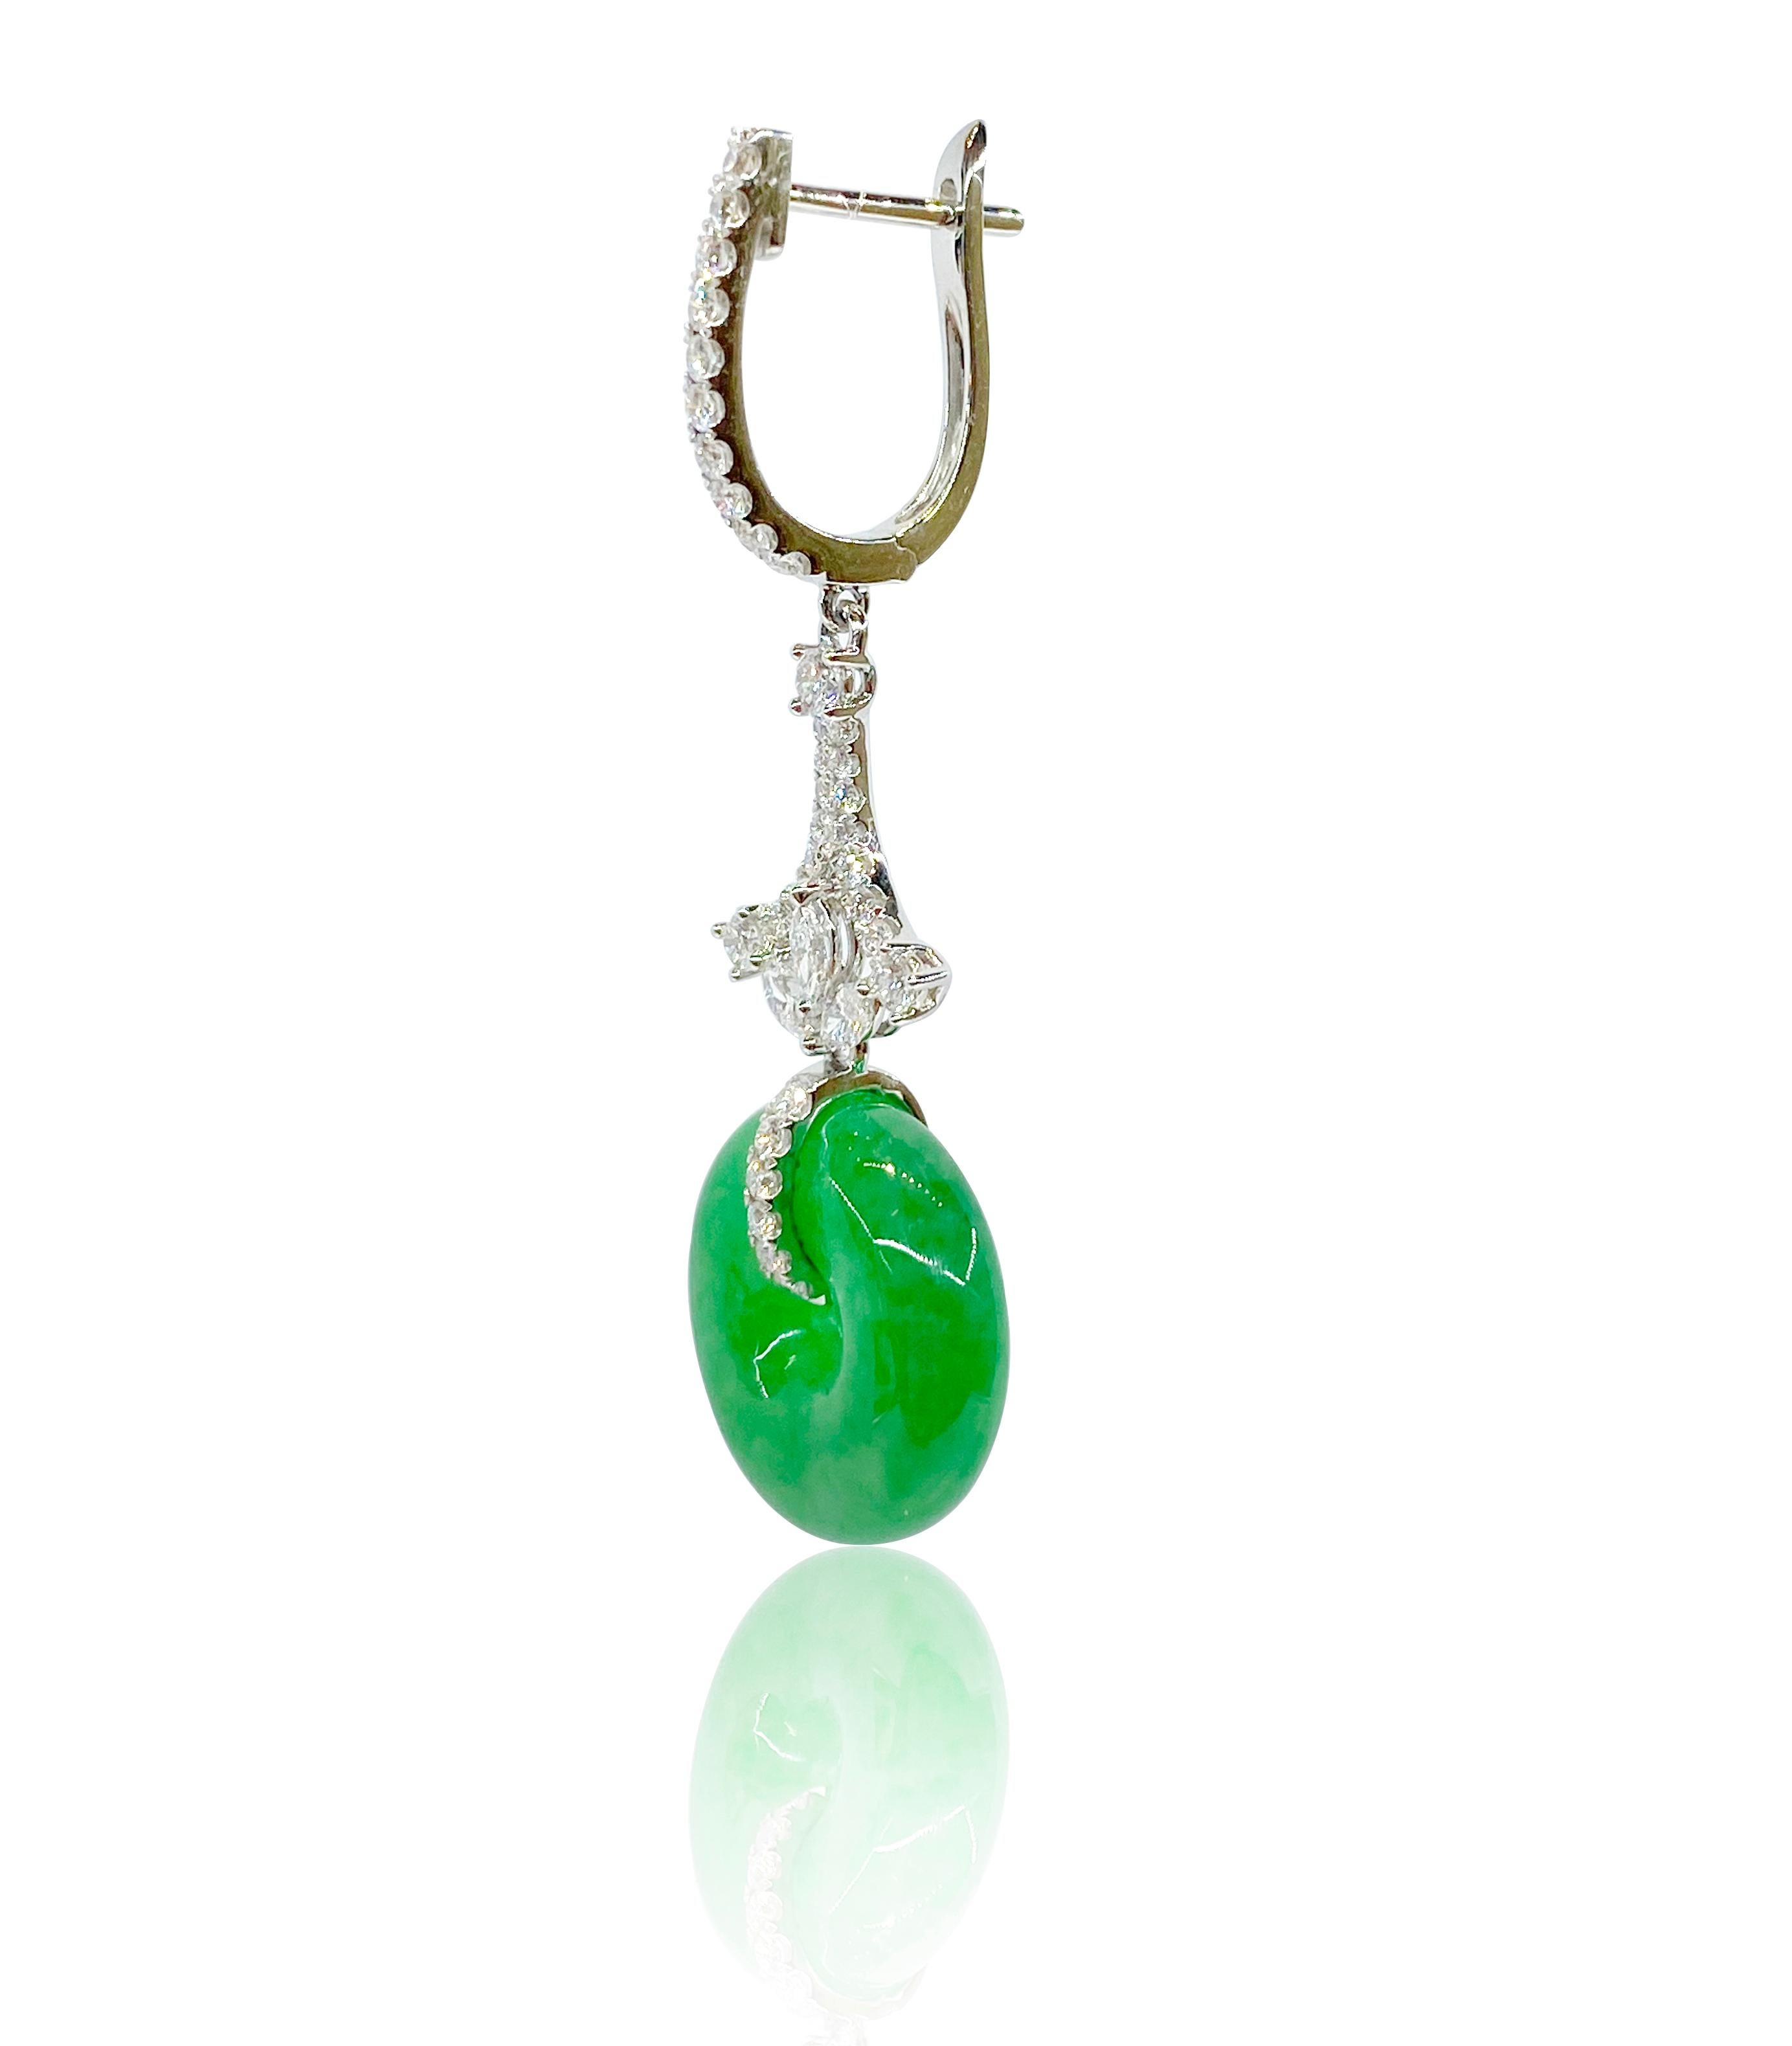 A pair of very fine jadeite and diamond earrings, each suspending a natural jadeite of brilliant emerald green colour and exceptional translucency, with brilliant and marquise diamonds weighing 1.03 carats, mounted in 18 Karat white gold. 